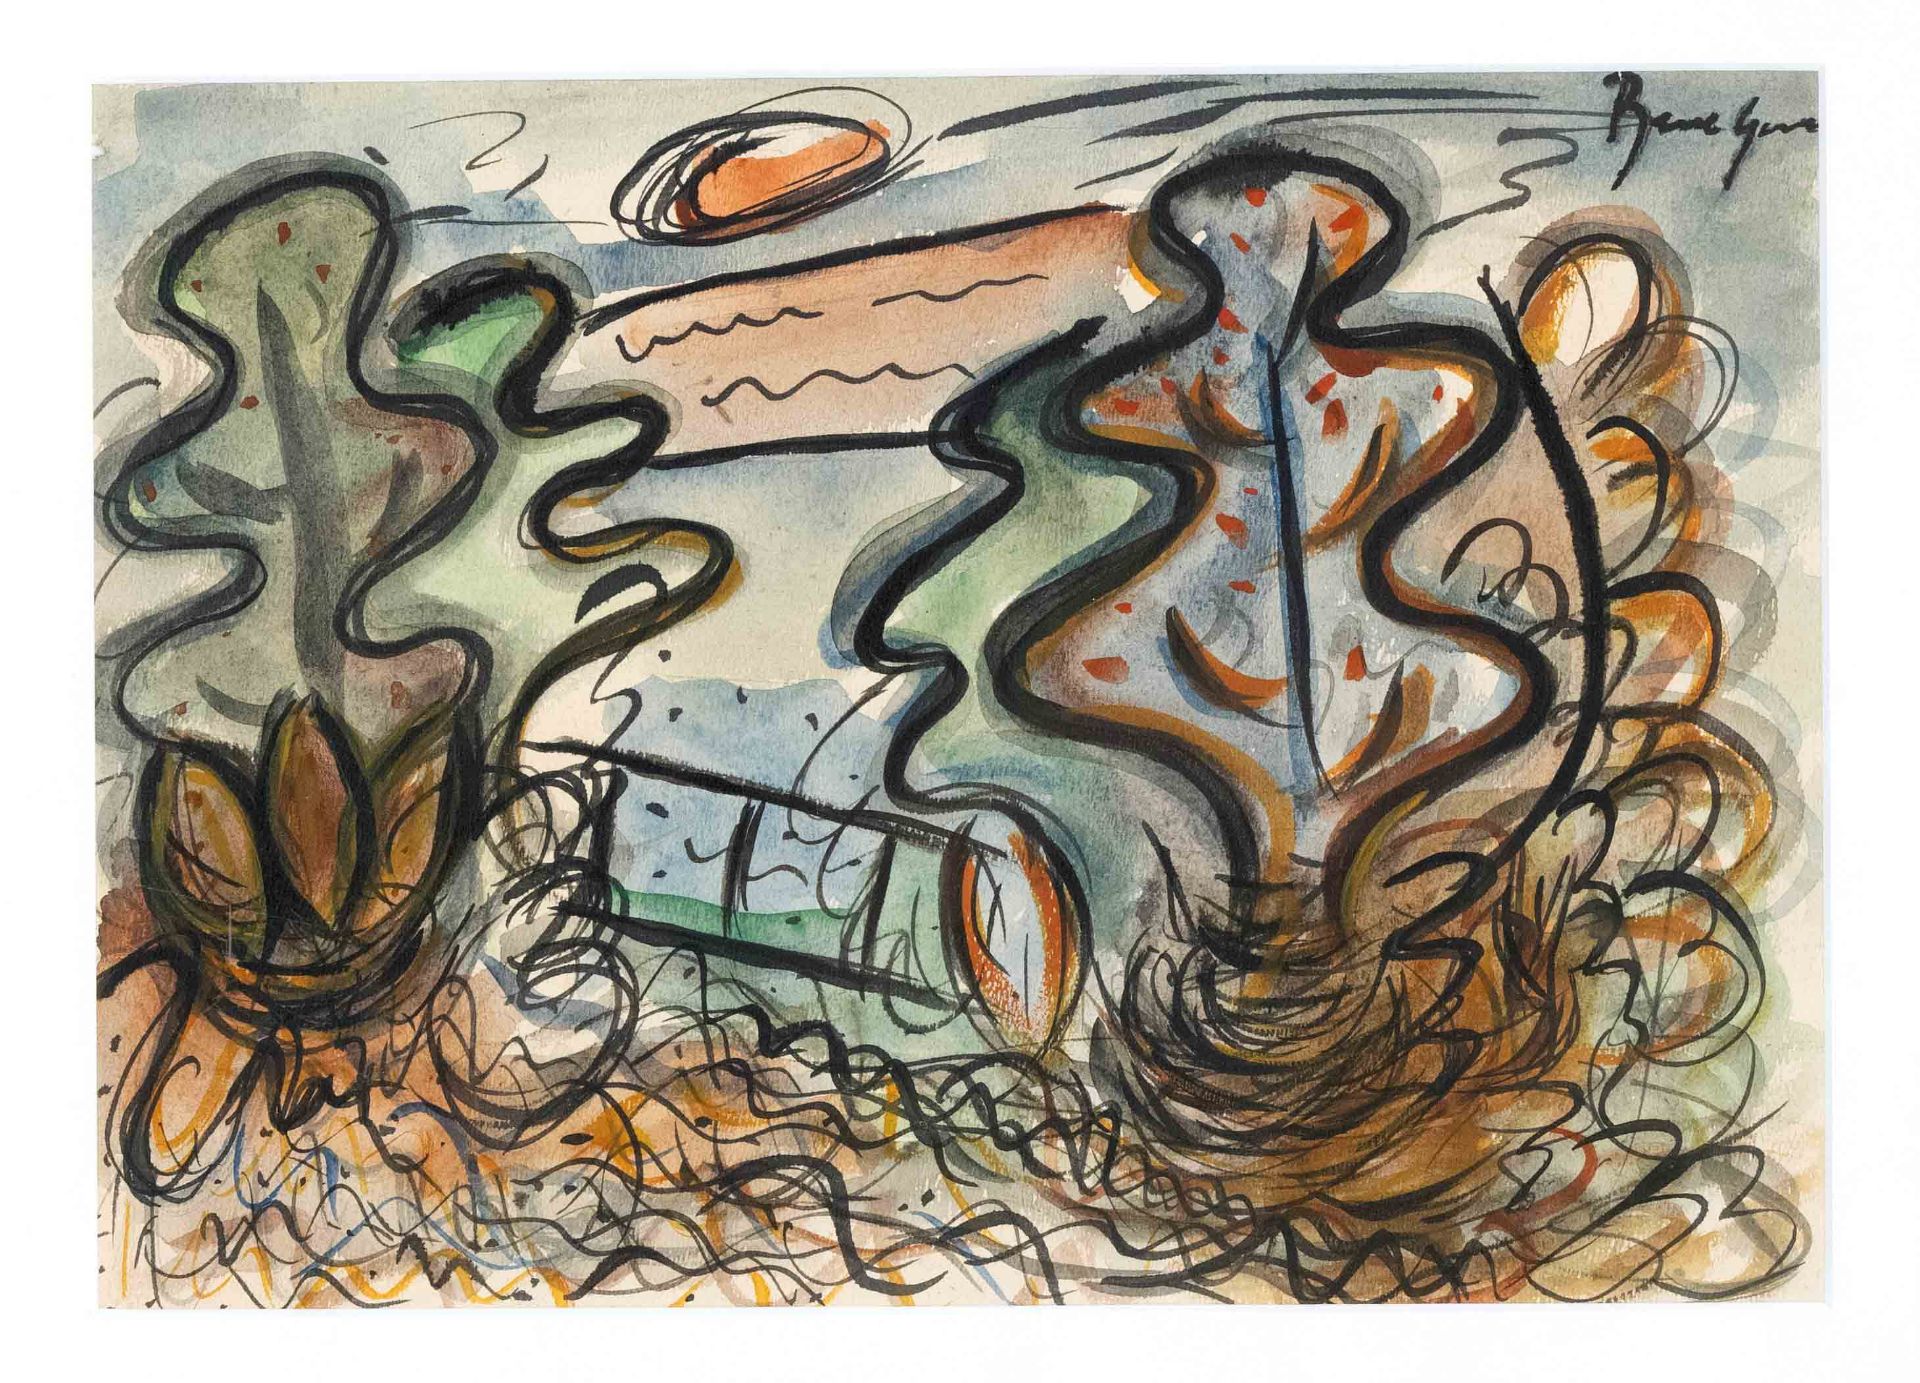 Géza Bene (1900-1960), Hungarian artist, abstract landscape, watercolor and ink on paper, signed